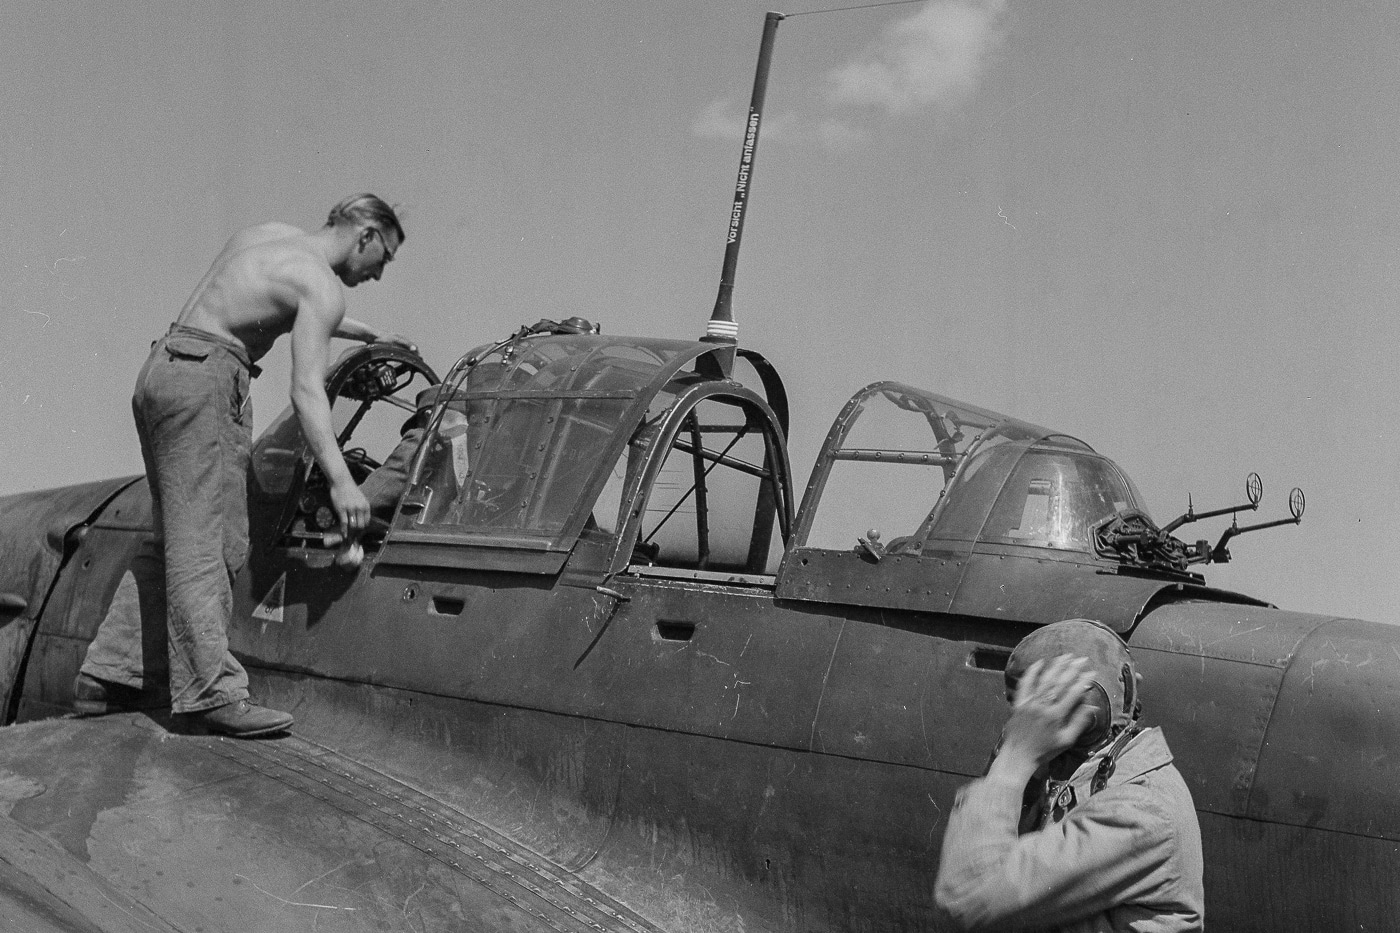 In this photograph, we see a Stuka crew preparing for a mission to destroy the bridges in the Battle of Tali–Ihantala. The Battle of Tali–Ihantala was part of the Finnish-Soviet Continuation War, which occurred during World War II. The battle was fought between Finnish forces—using war materiel provided by Germany—and Soviet forces.